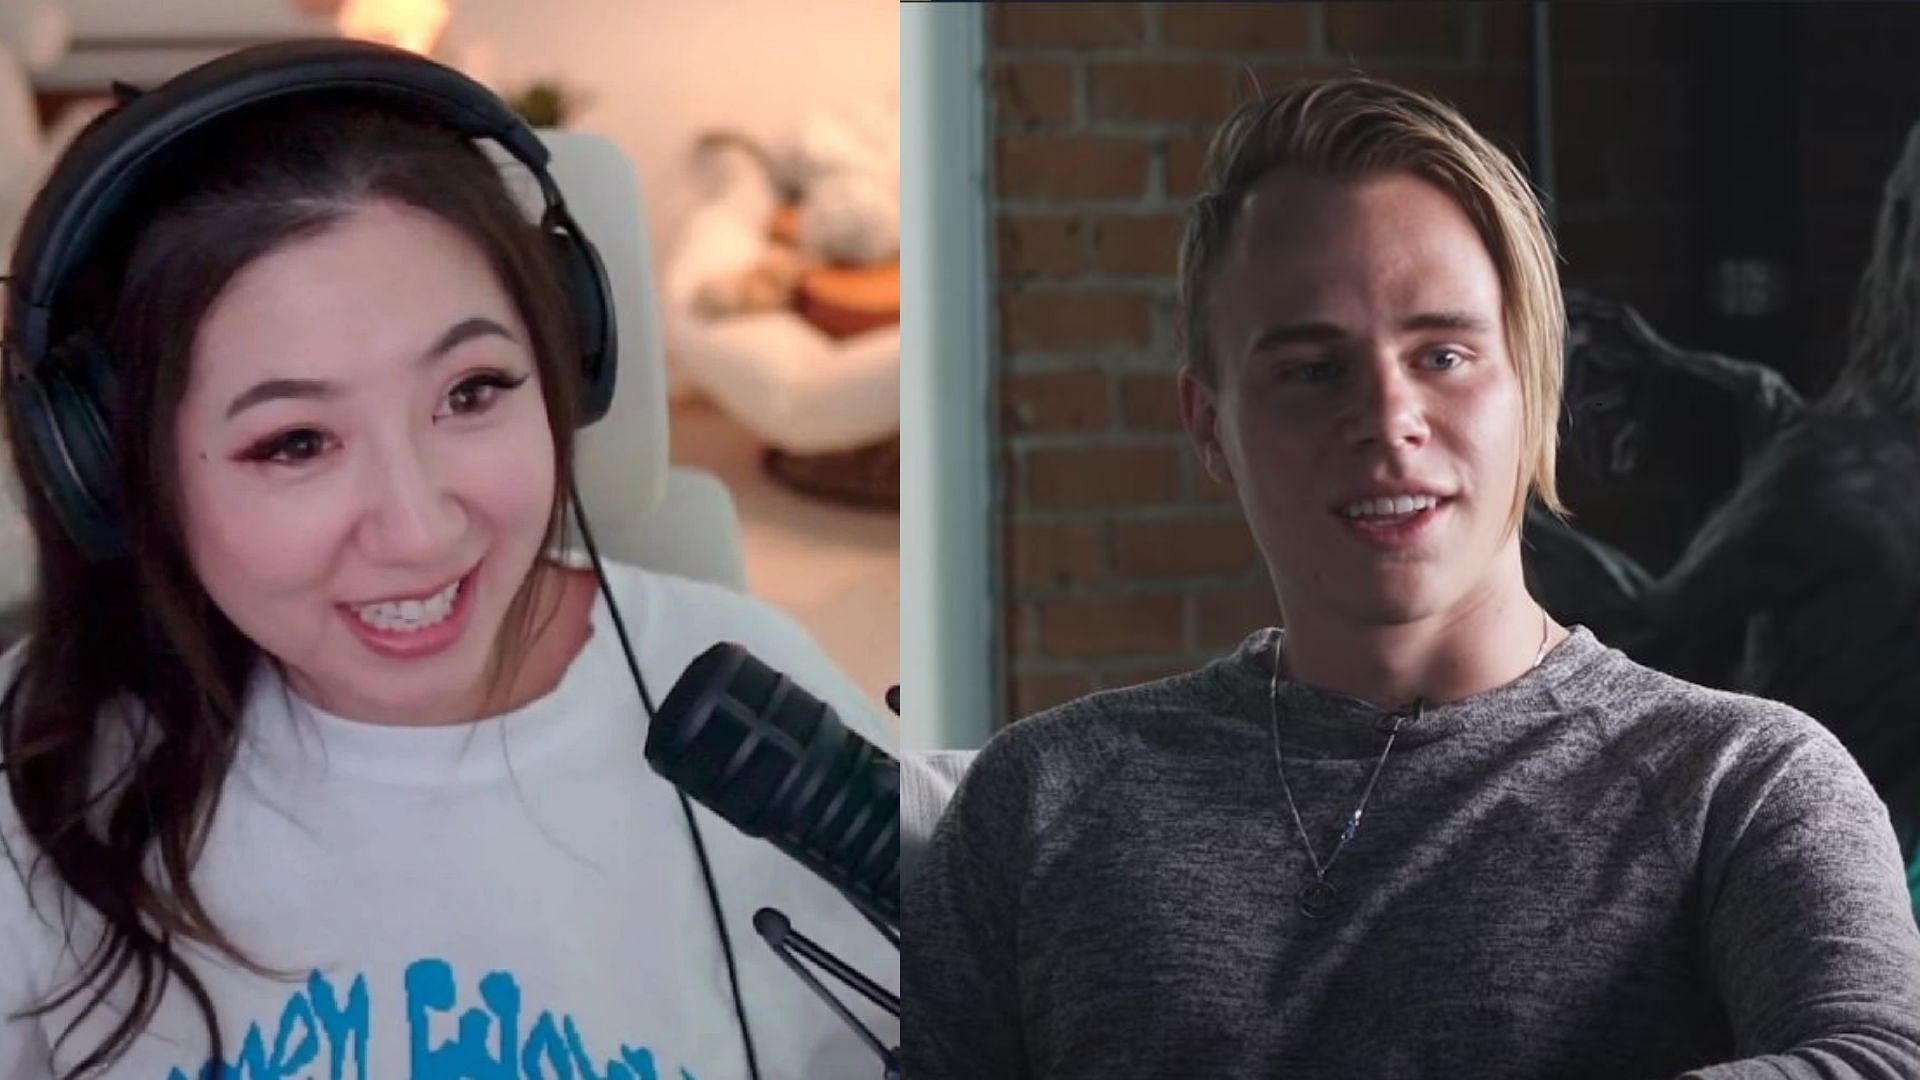 Fuslie hits back at Blaustoise by making fun of his old haircut on livestream (Image via Sportskeeda)